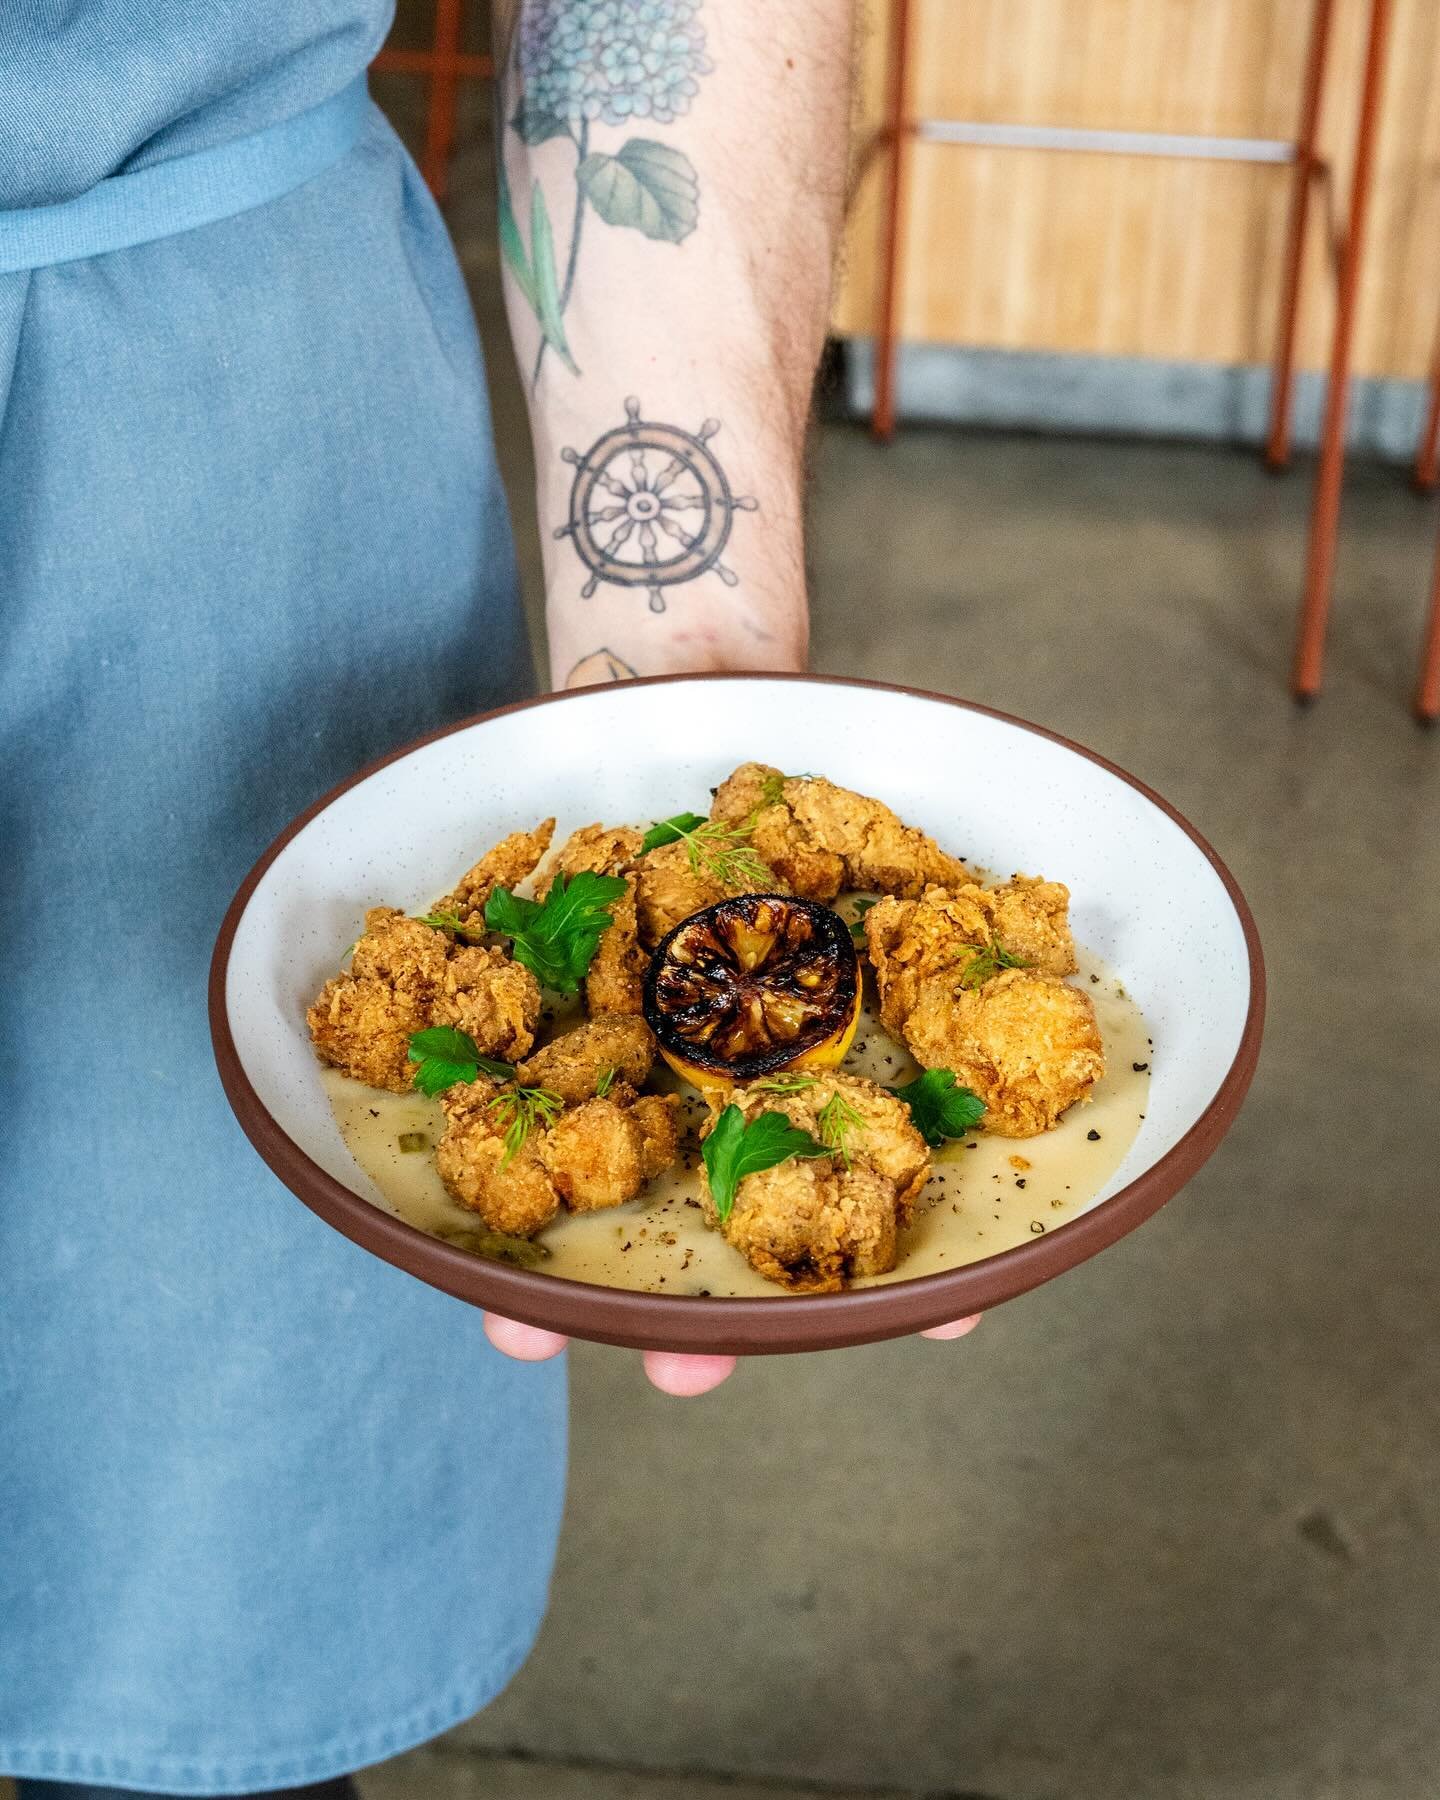 🚨 New menu item alert! 🚨
&zwnj;
Pictured here are our masa fried mushrooms, an homage to Chefs roots and our farmer partners spring bounty. The mushrooms are deep fried and sit on a bed of gravy made with green garlic, topped with fresh herbs and c